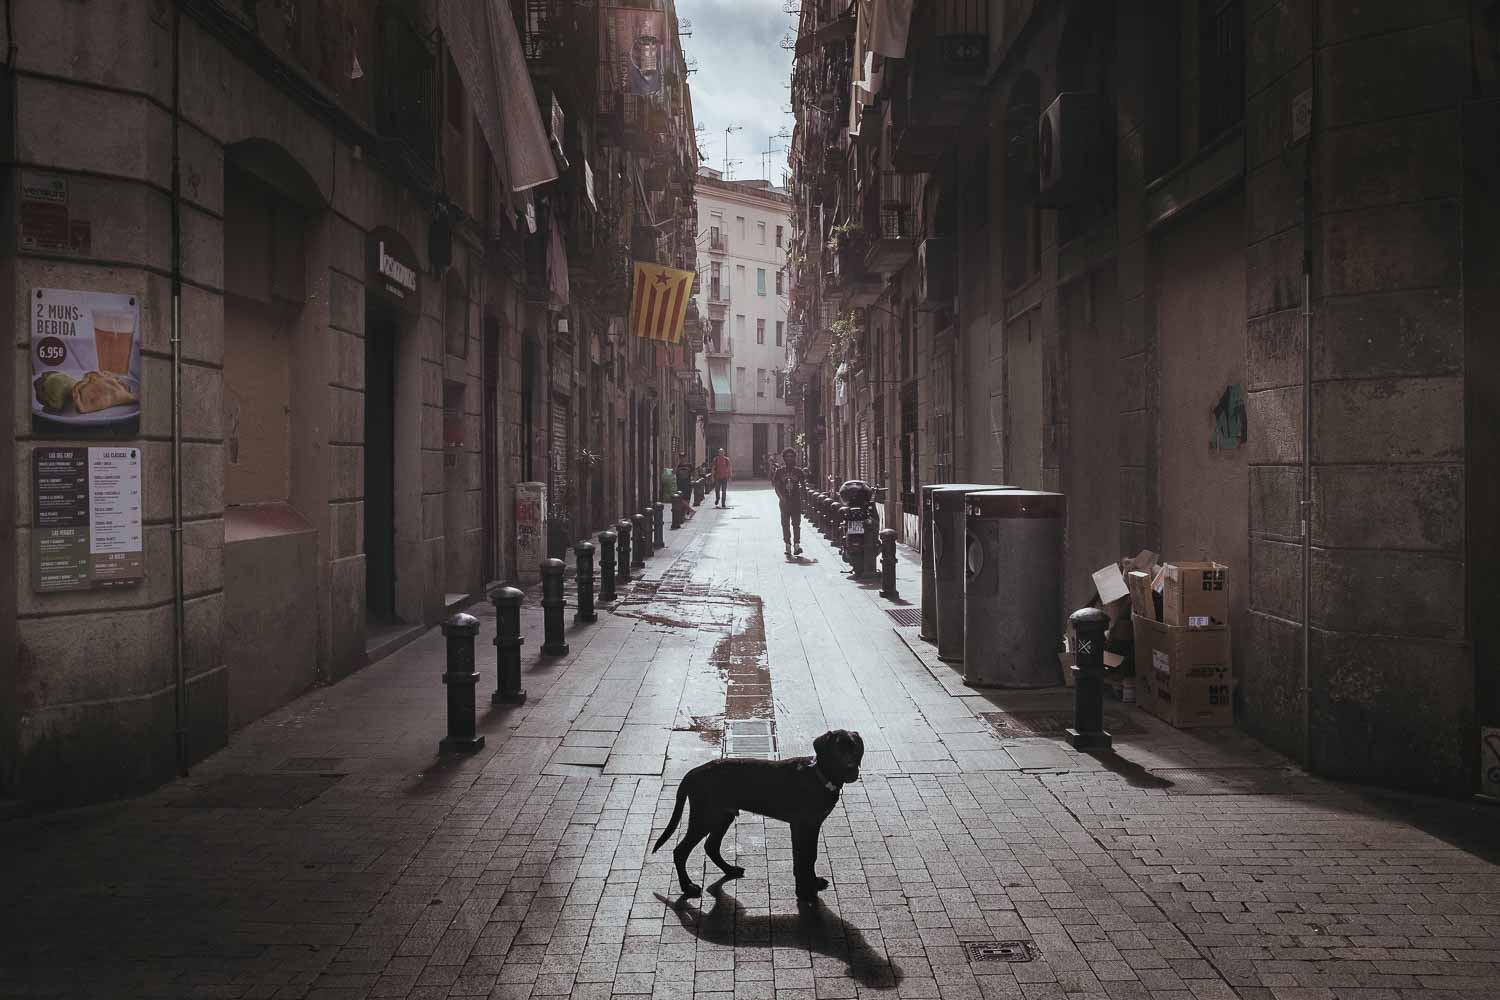 This photo shows the fine art print The Streets of Barcelona by Philip Reitsperger